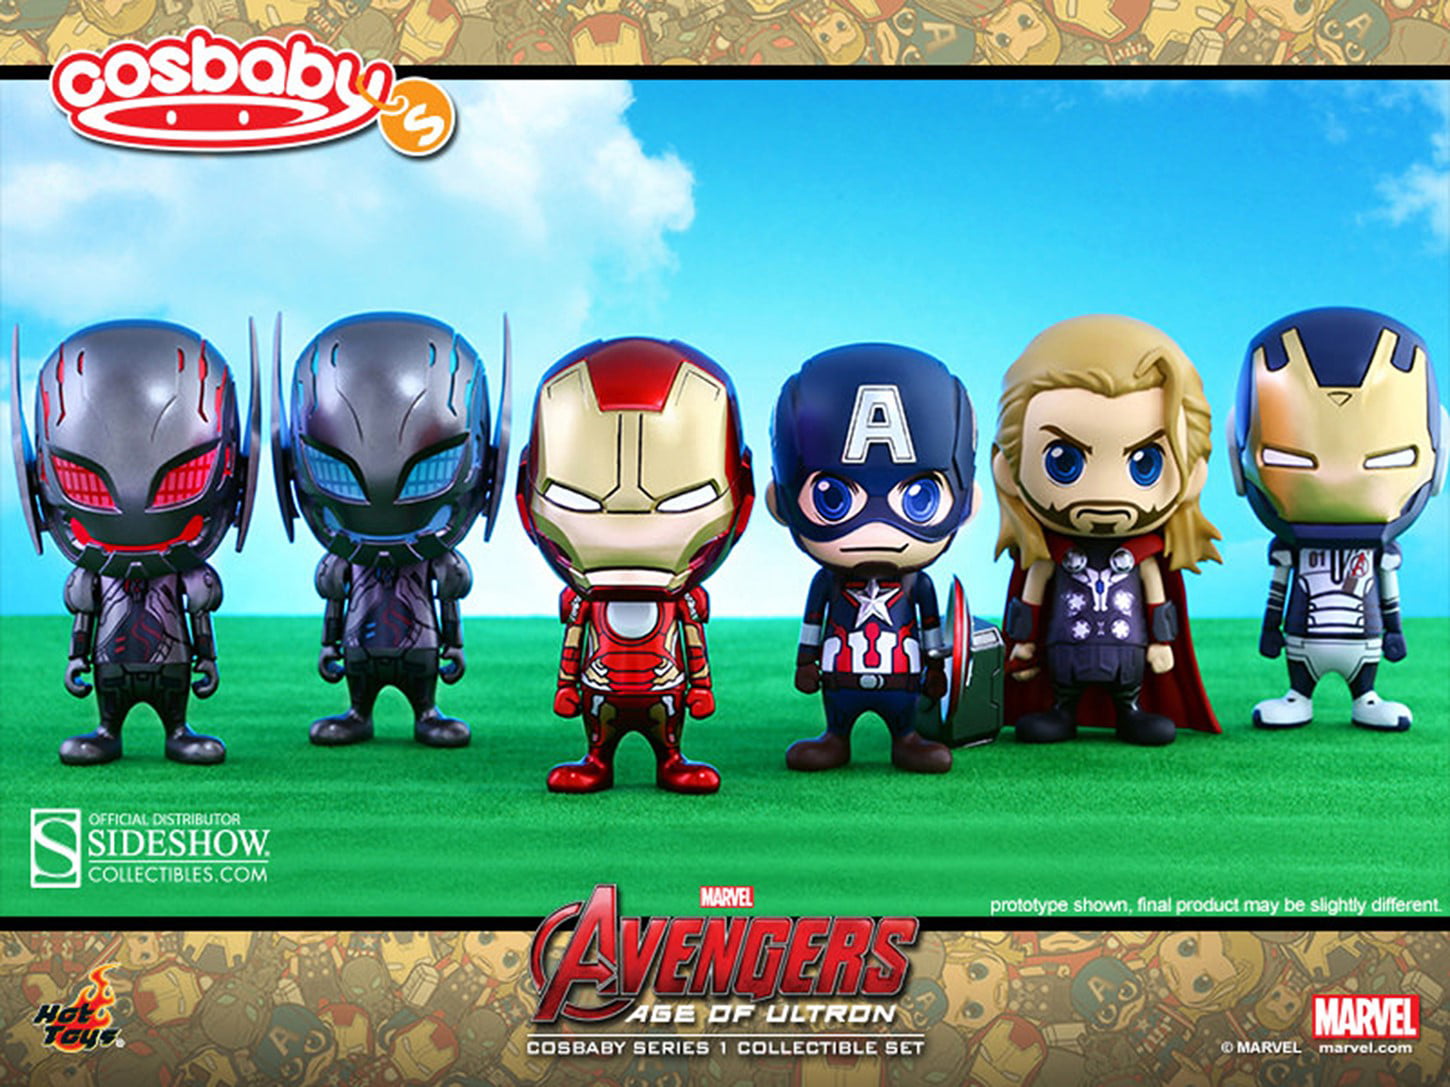 Hot Toys Iron Legion Avengers Age of Ultron Cosbaby Series 1 4 inches Vinyl Figu 